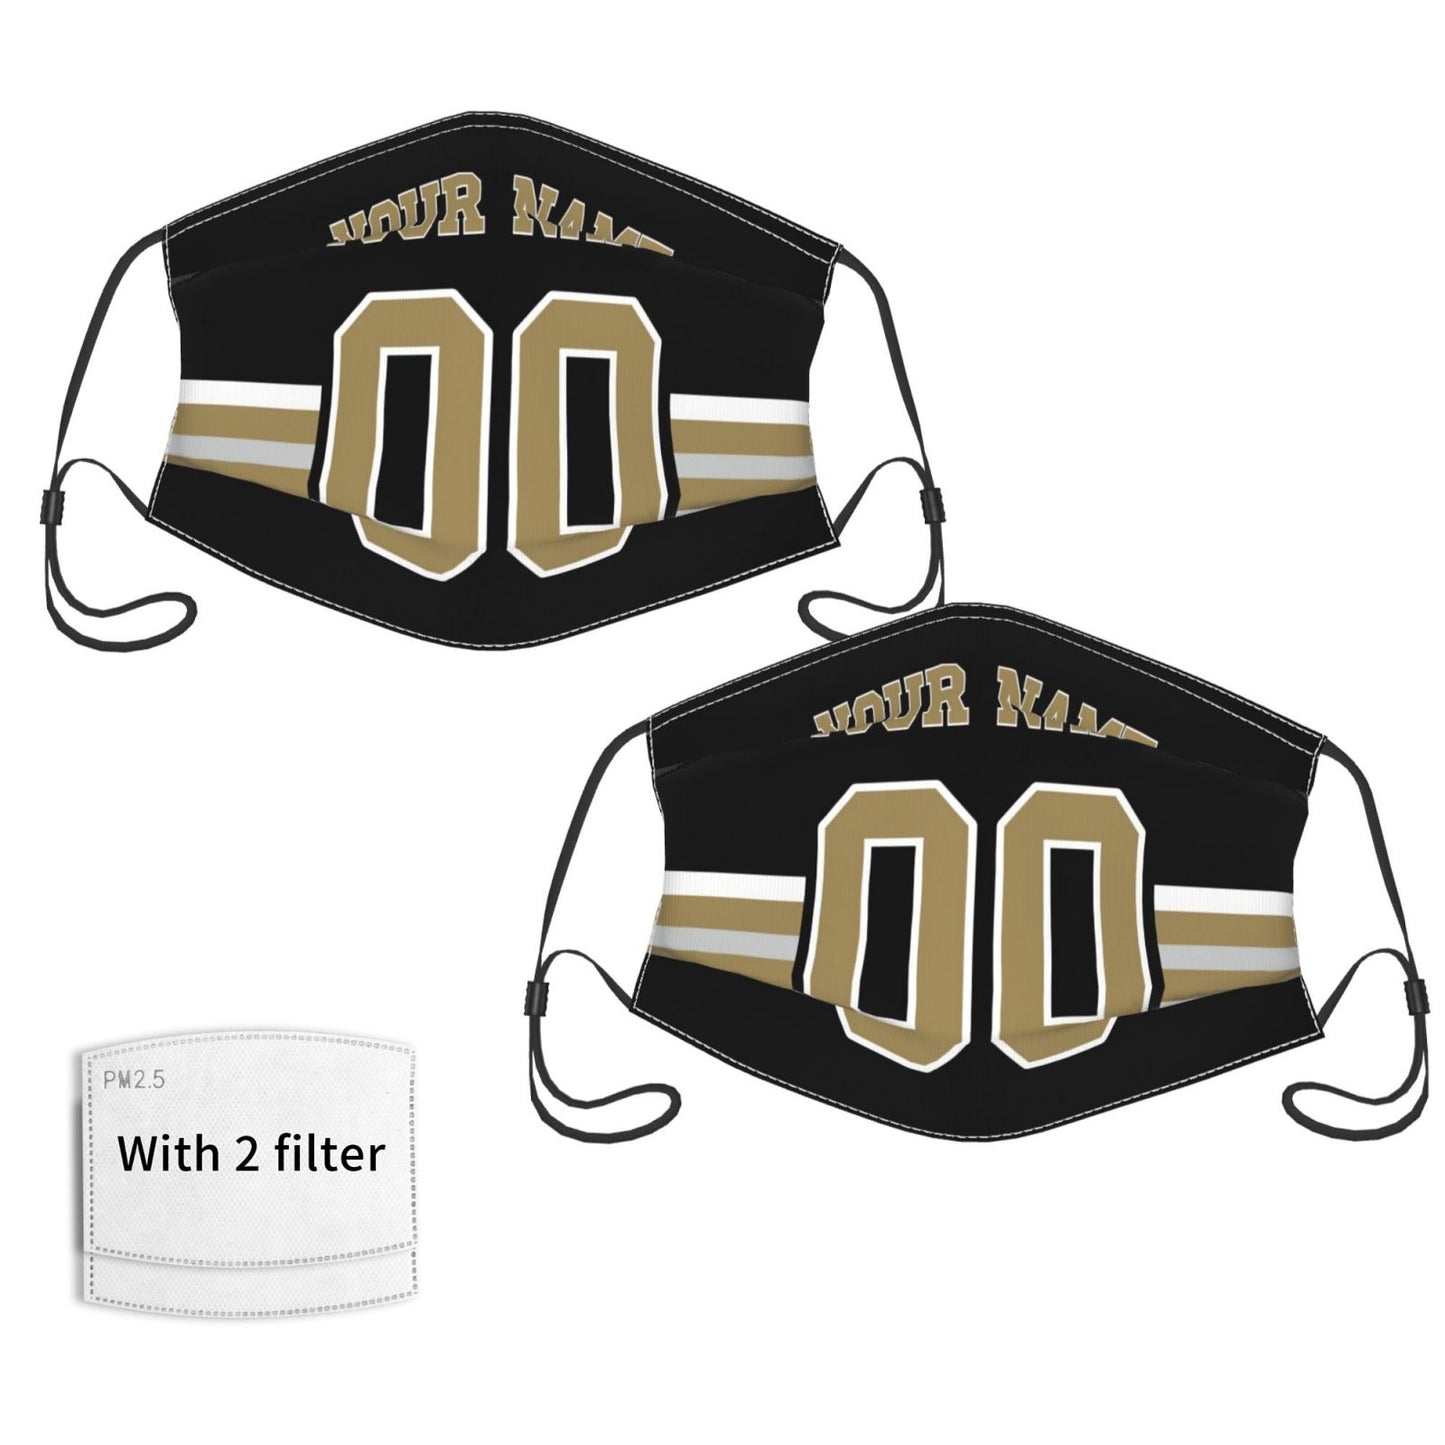 2-Pack New Orleans Saints Face Covering Football Team Decorative Adult Face Mask With Filters PM 2.5 Black